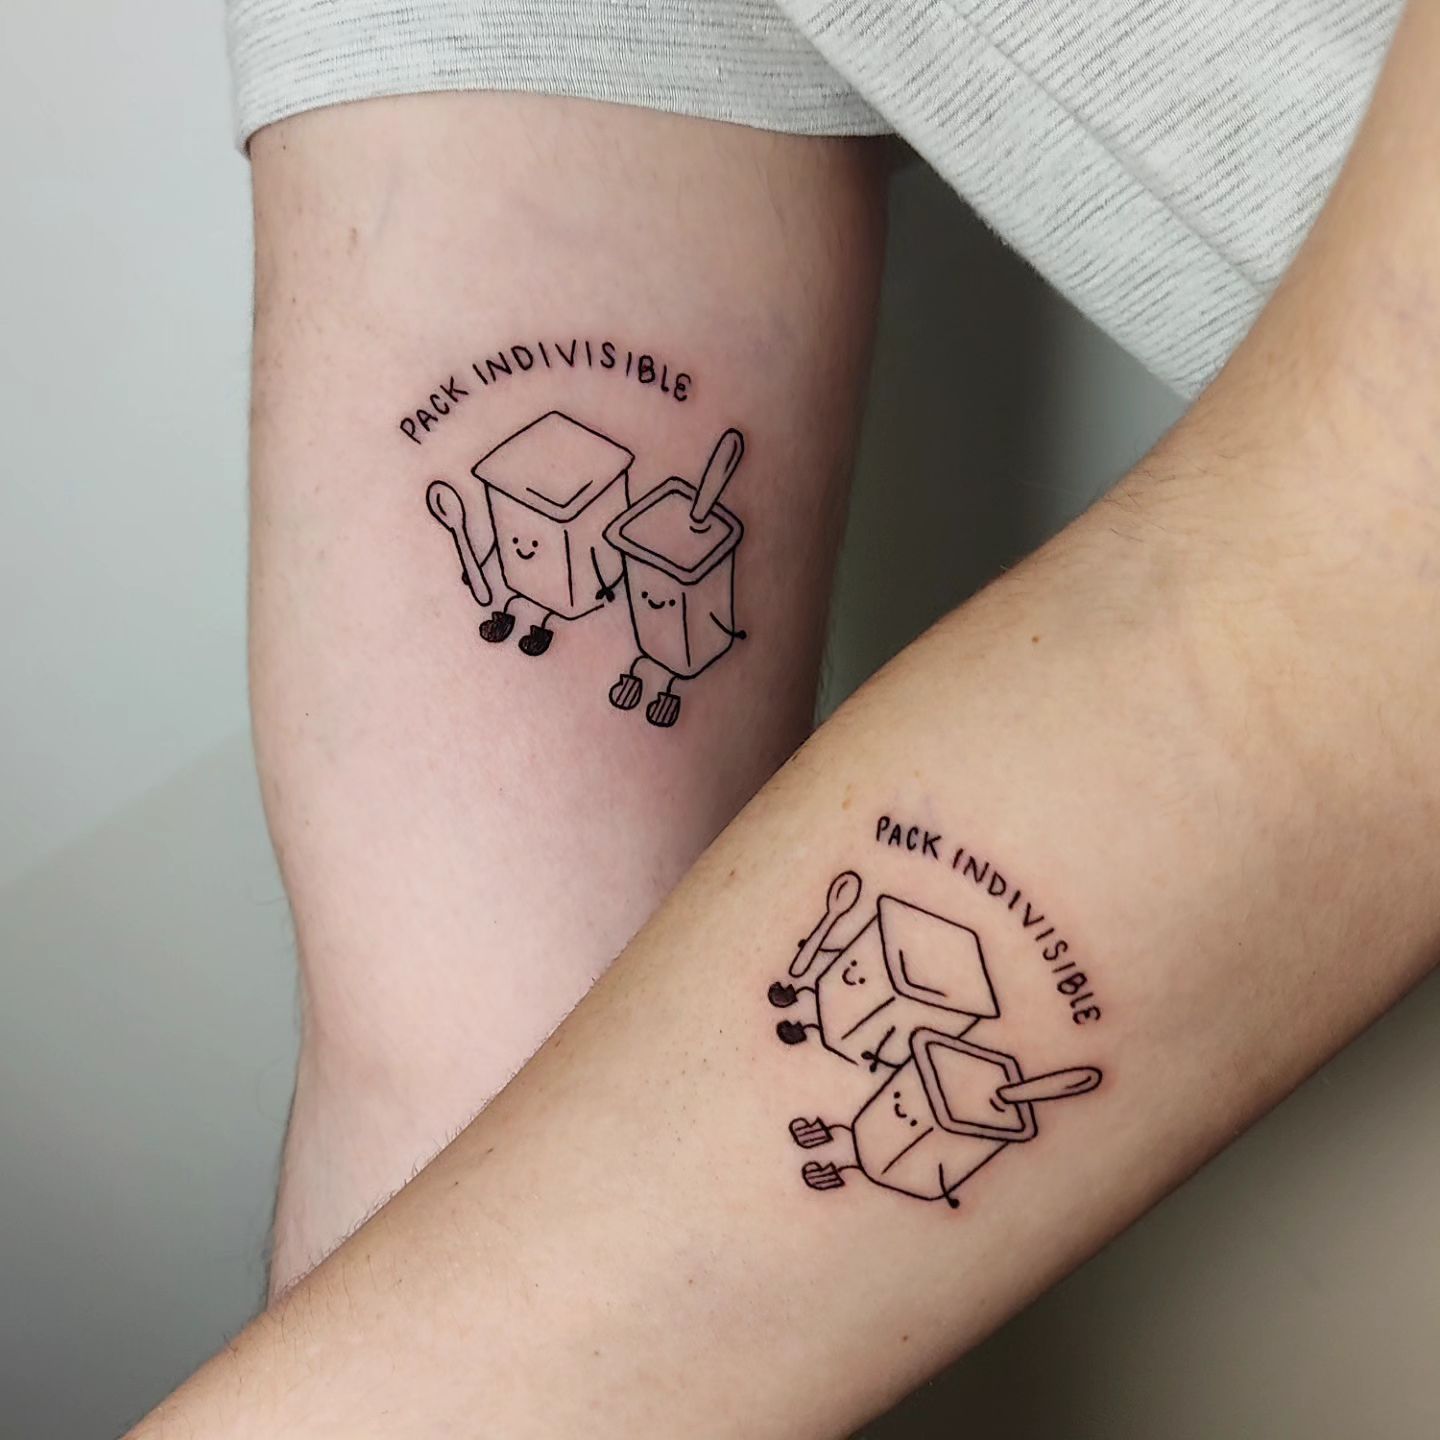 Couple Tattoos: Inspiration and Advice (Part 2) - Timebomb Piercing &  Tattoos | Croydon & Bournemouth